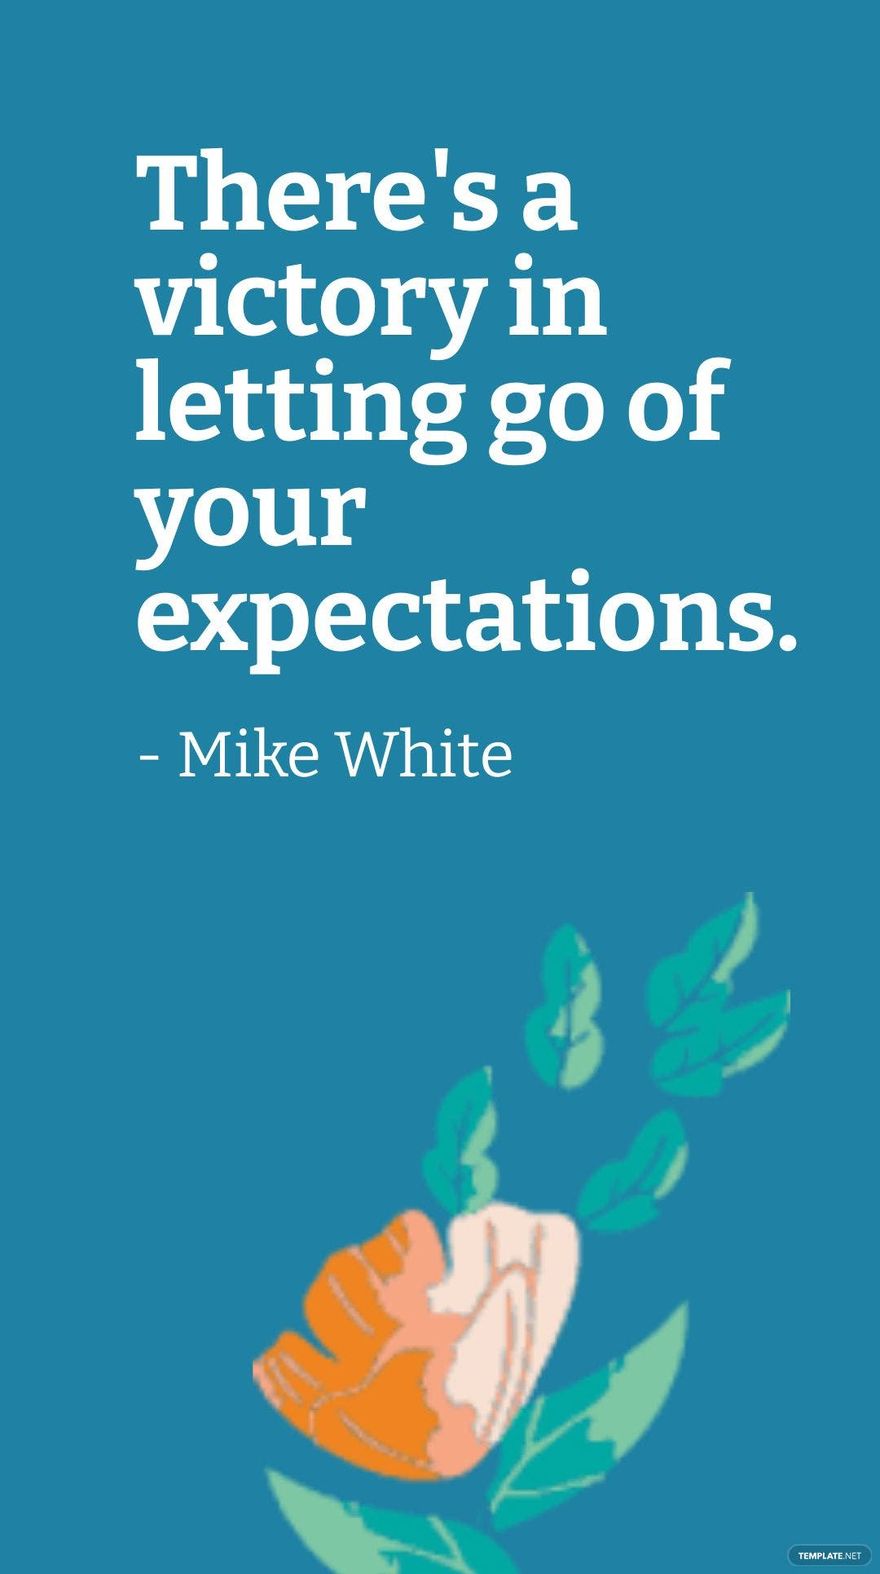 Free Mike White- There's a victory in letting go of your expectations. in JPG